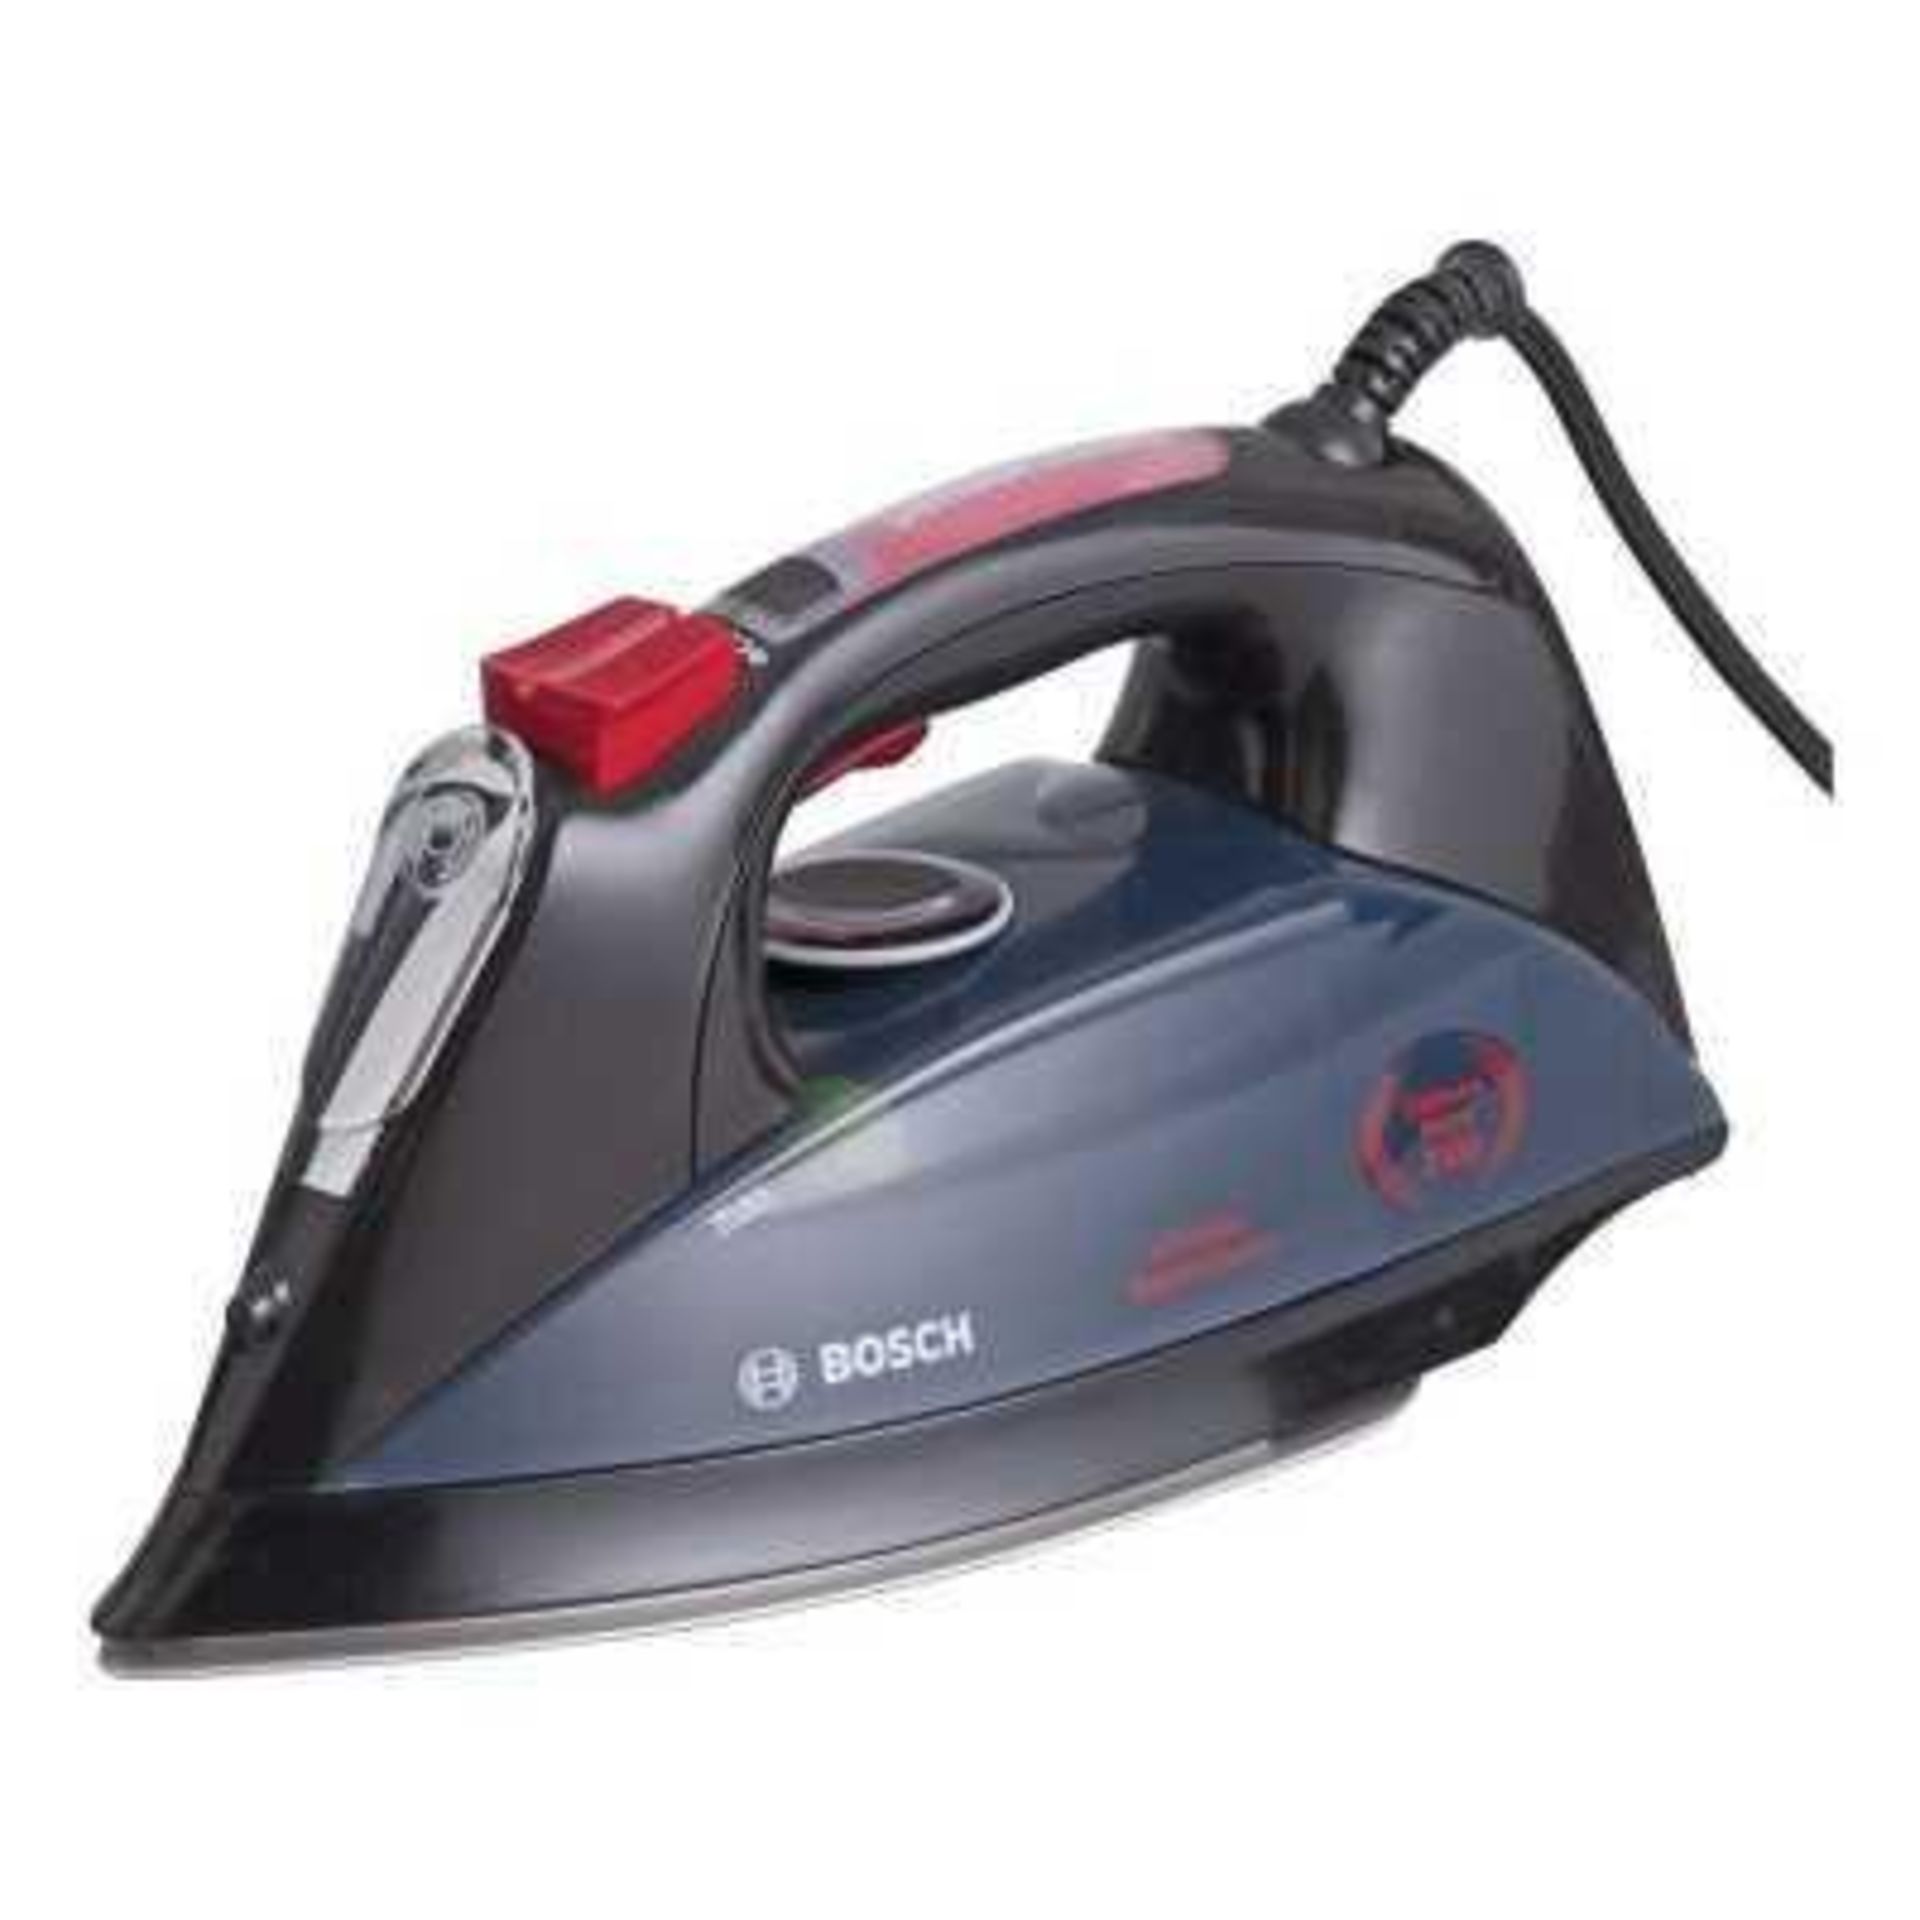 RRP £200 Lot To Contain 3 Unboxed Items To Include A Tefal Steam Iron, A Bosch Steam Iron, And A Mor - Image 2 of 3